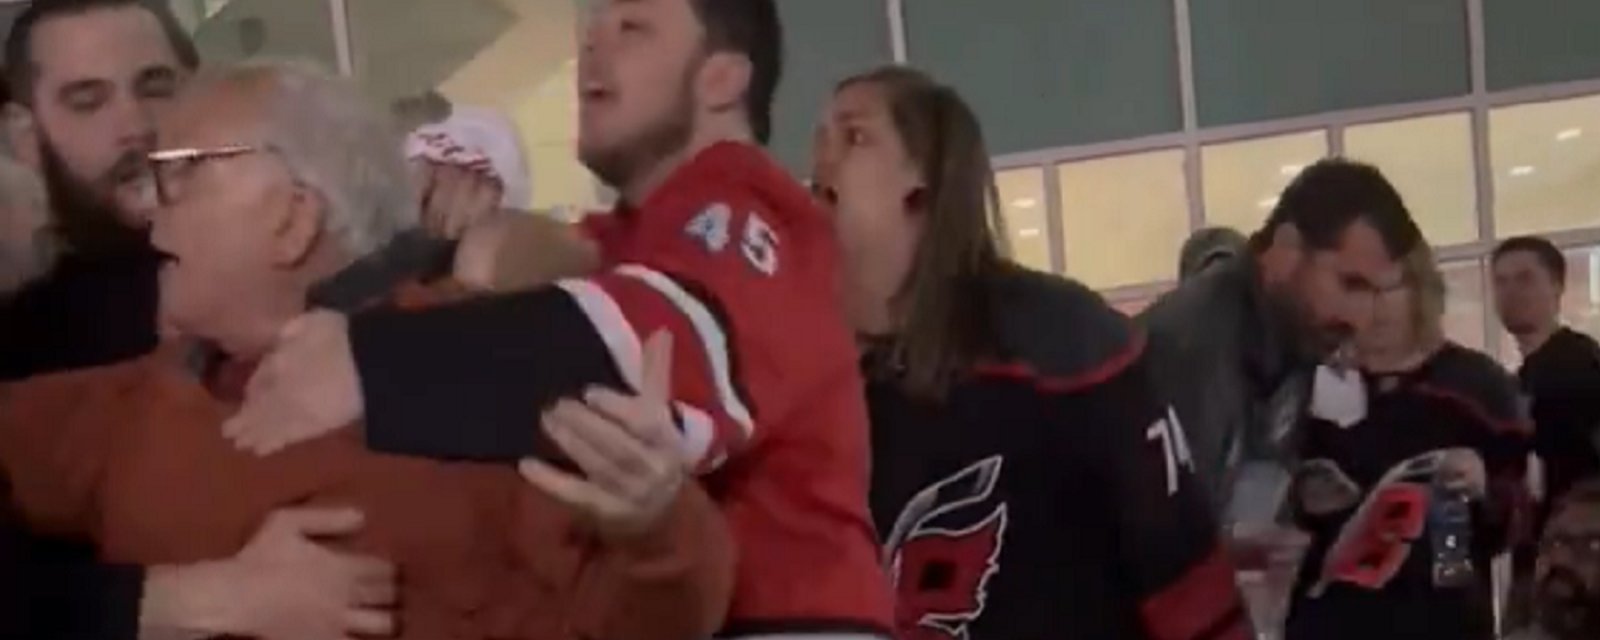 Fan knocked out after Game 4 between Canes and Rangers.